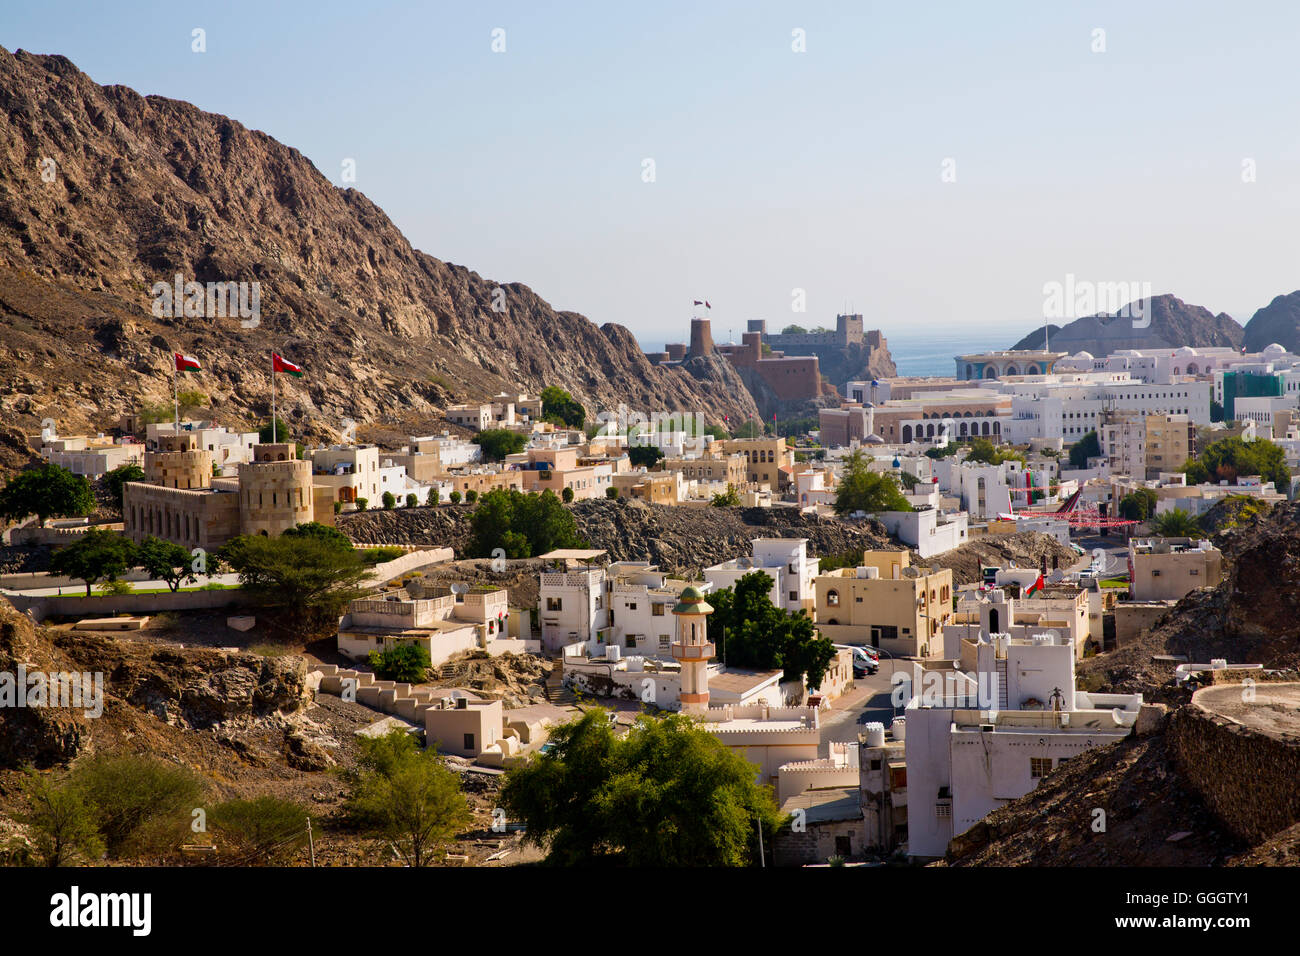 geography / travel, Oman, Sultanate of Oman, Muscat, view towards the old town of the old mountain pass road, Additional-Rights-Clearance-Info-Not-Available Stock Photo